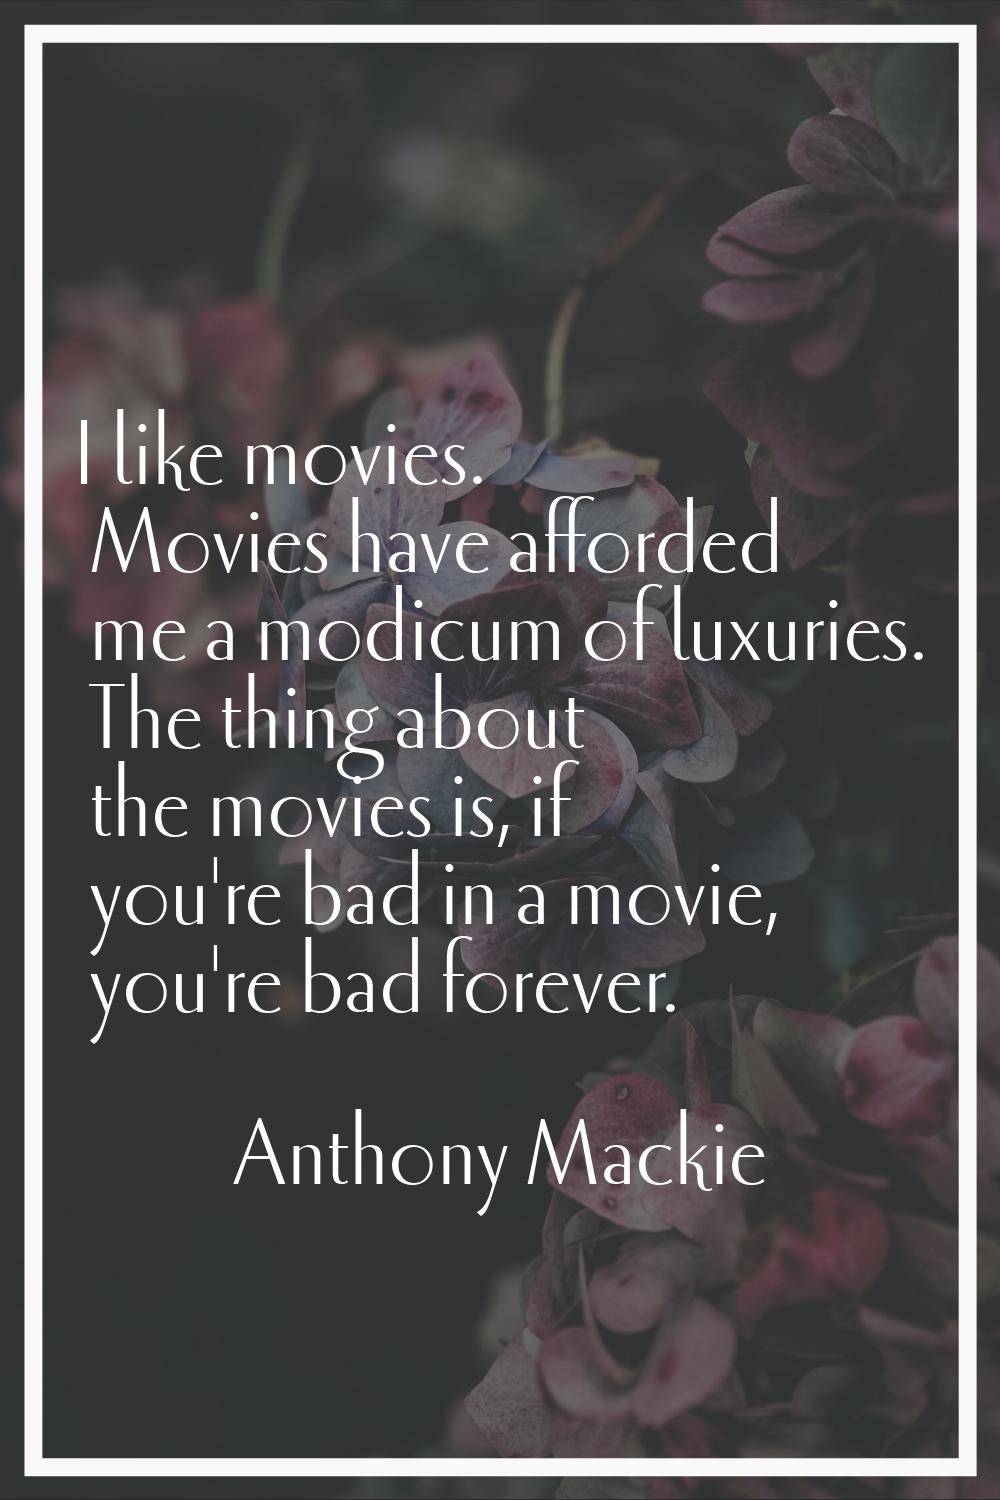 I like movies. Movies have afforded me a modicum of luxuries. The thing about the movies is, if you